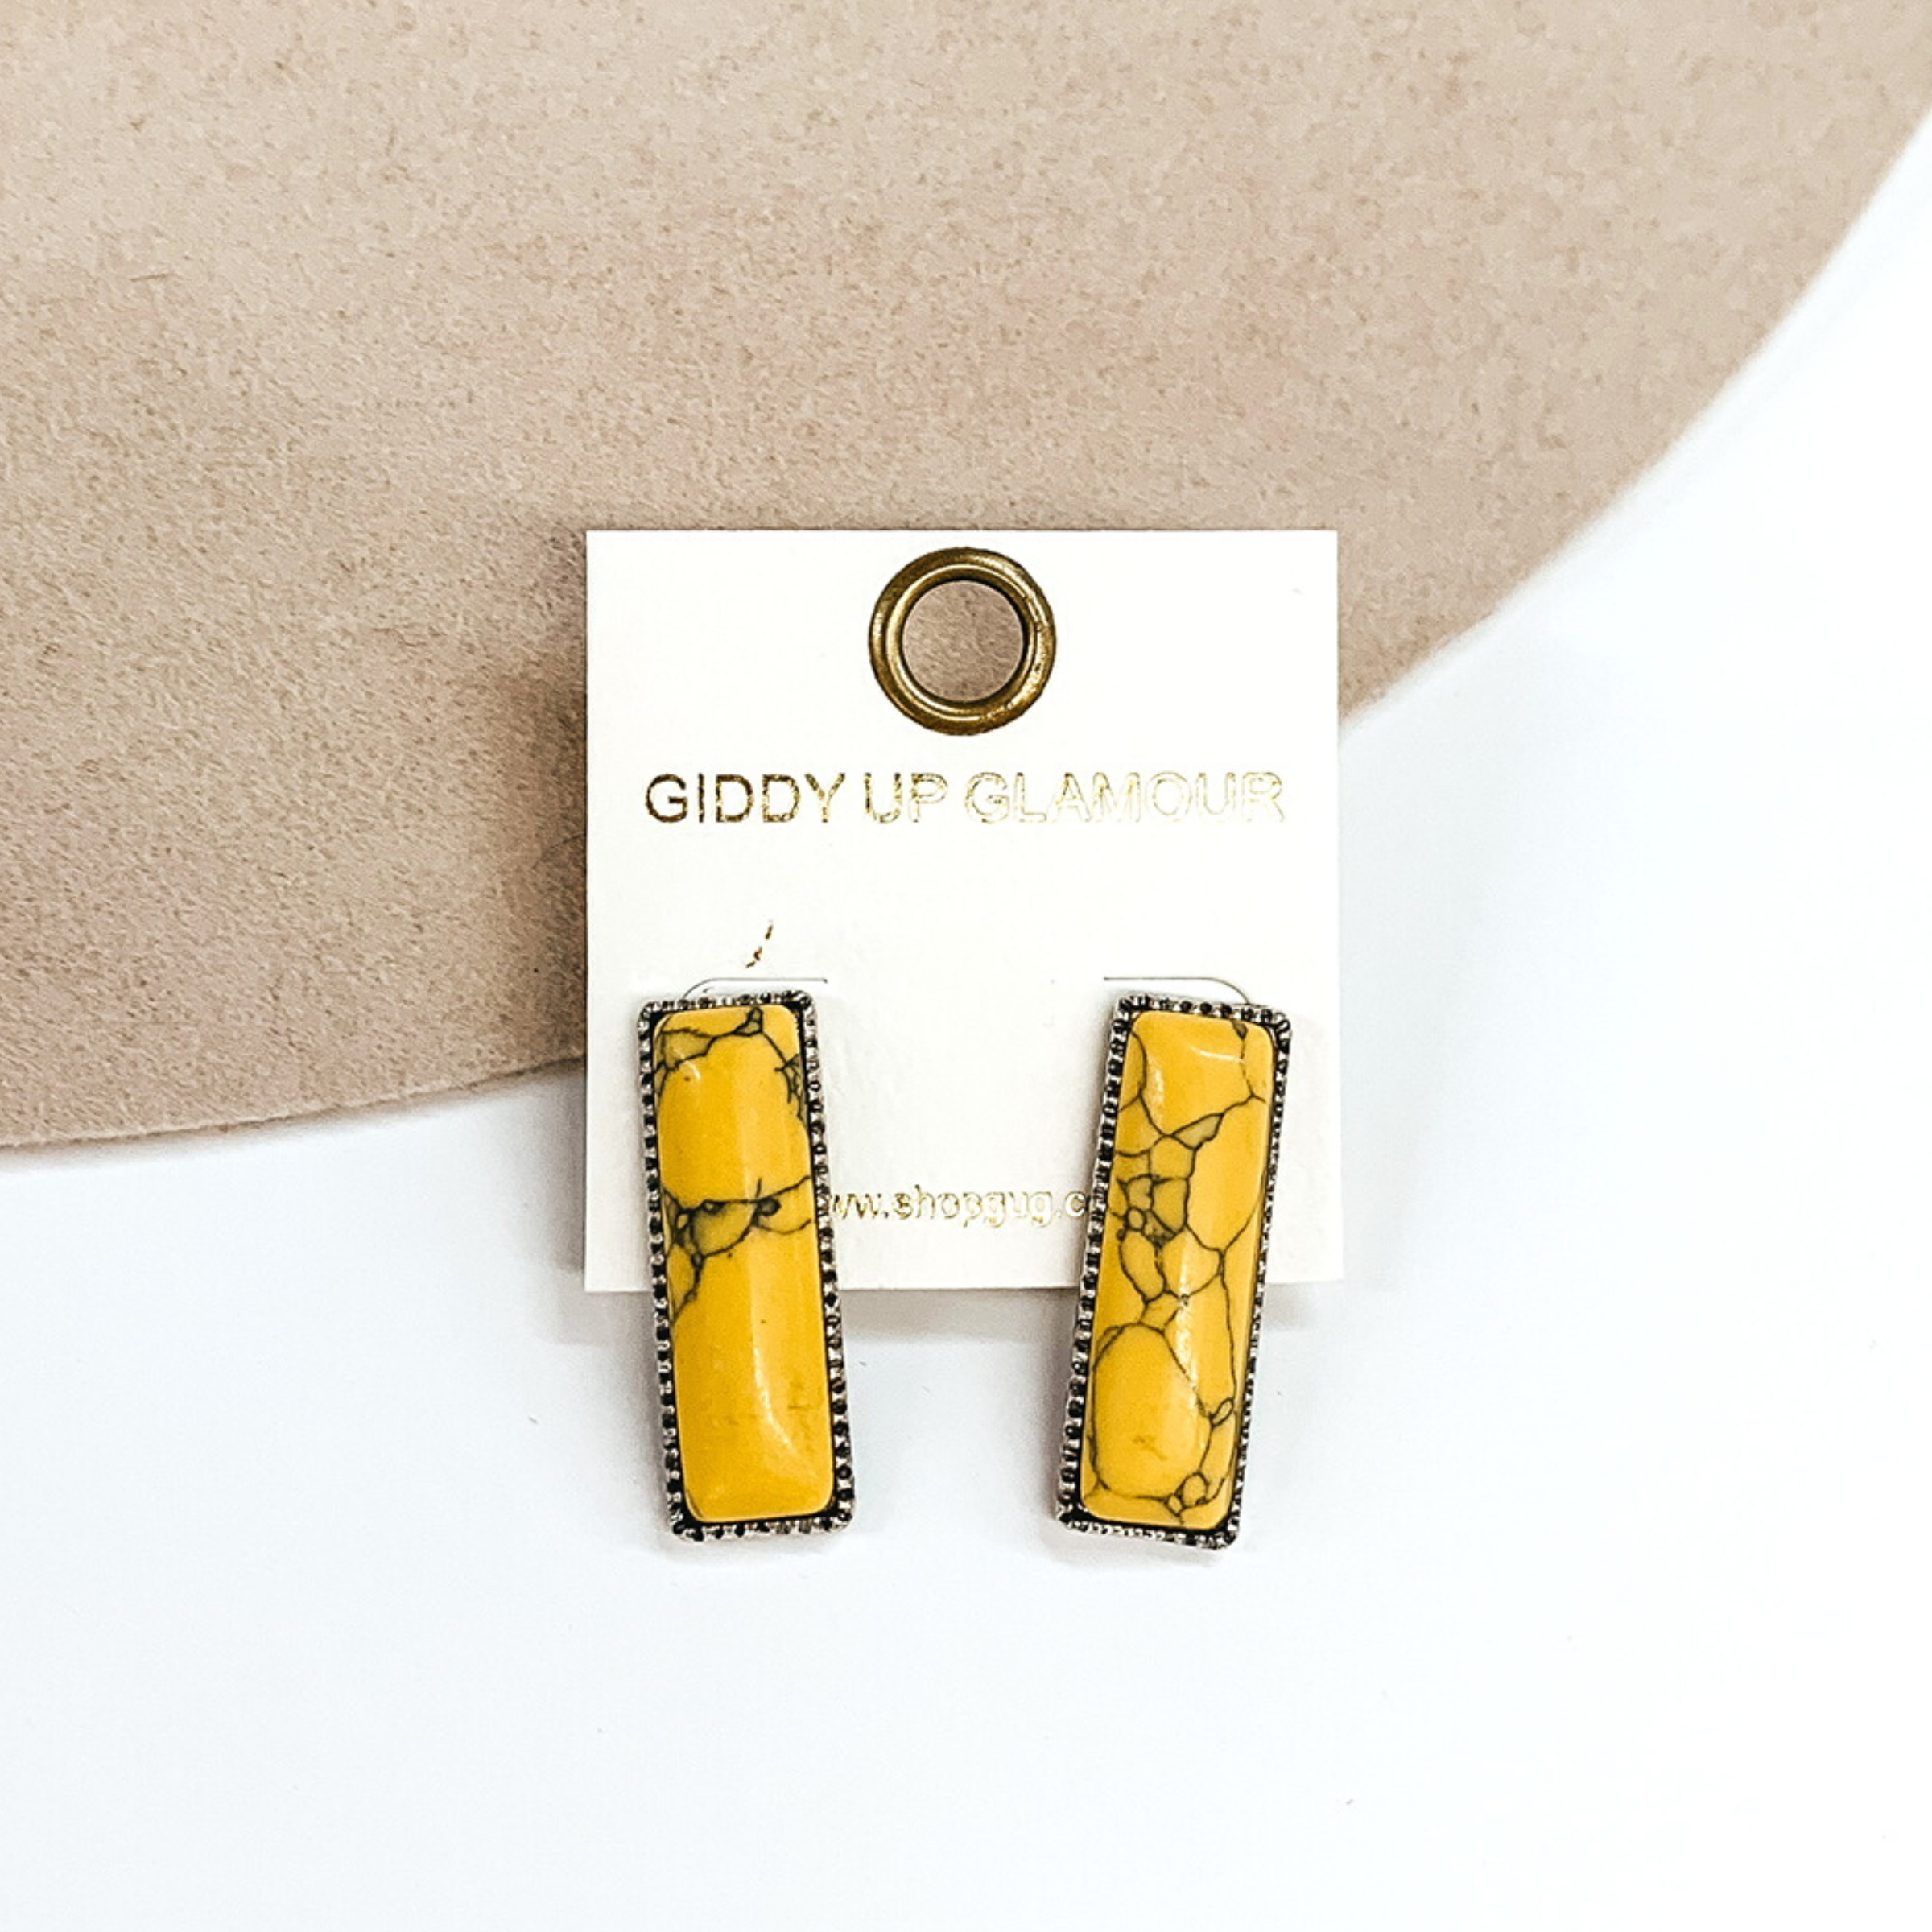 Silver rectangle earrings with a yellow rectangle stone. These earrings are pictured on a white and beige background. 